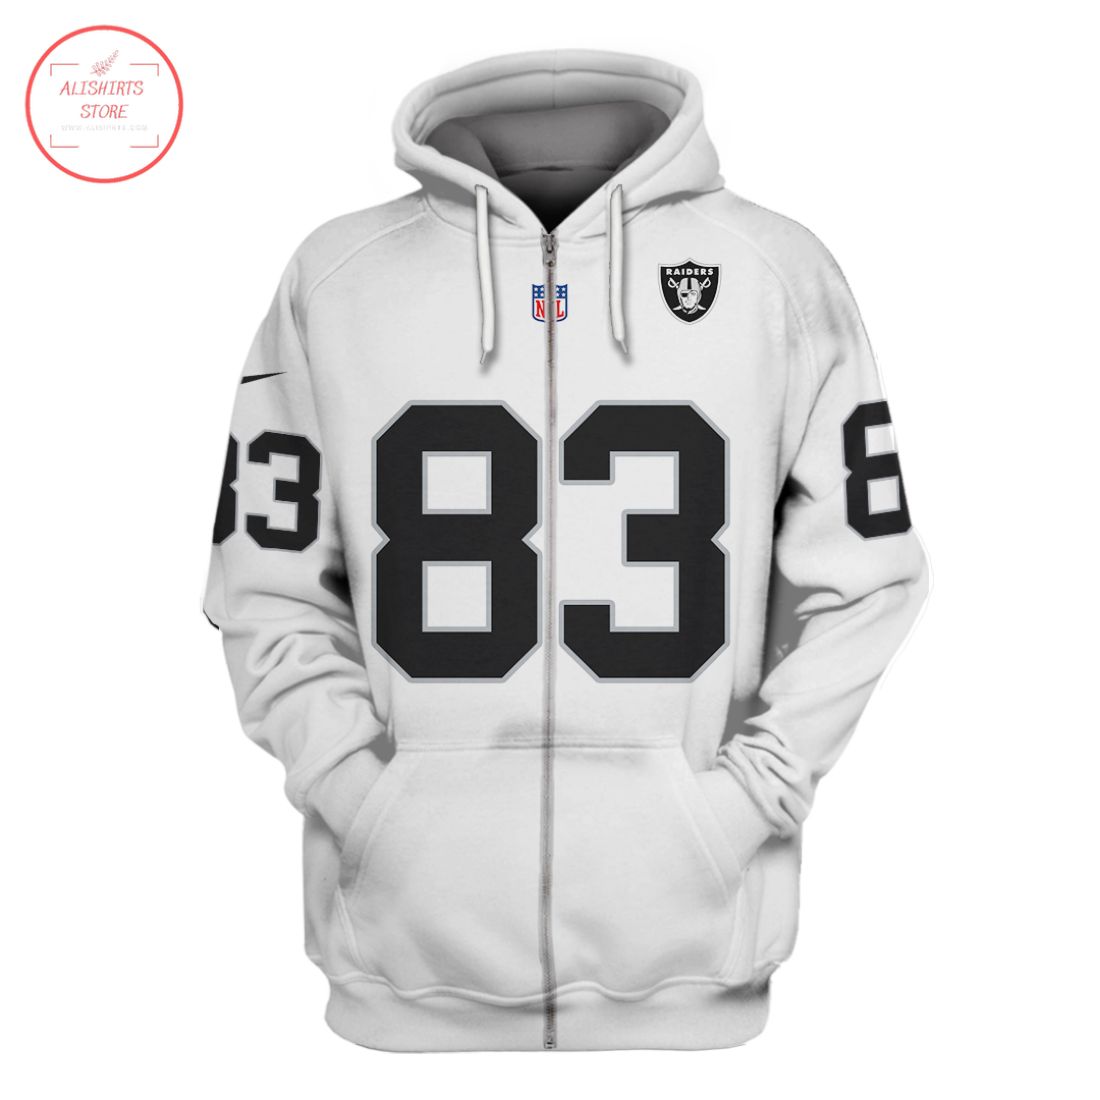 NFL Oakland Raiders Waller White Shirt and Hoodie